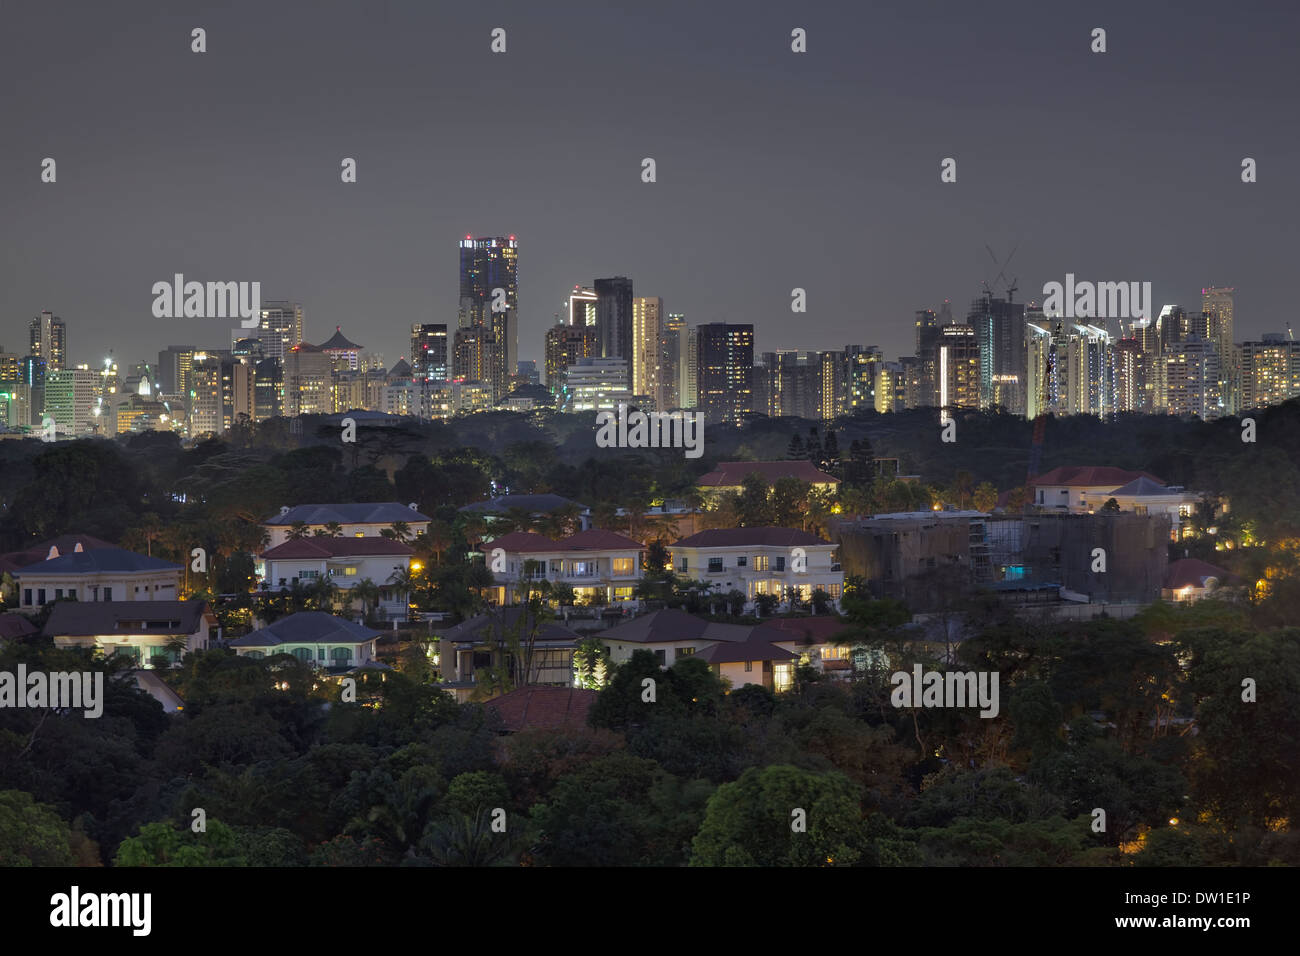 Singapore Private Homes with Central Business District CBD Skyline inthe Background at Night Stock Photo